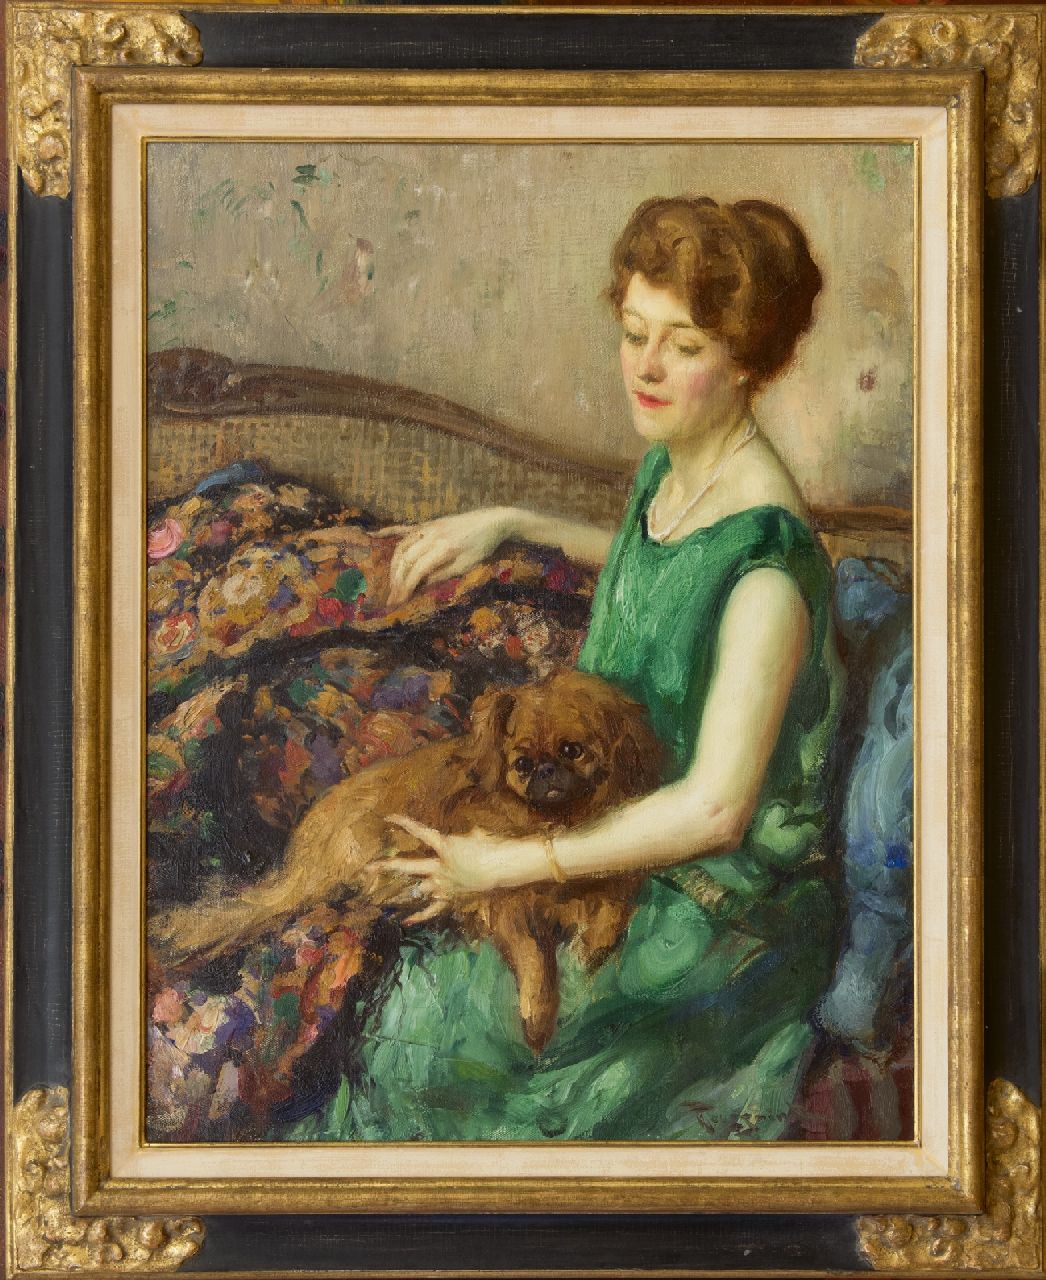 Toussaint F.  | Fernand Toussaint | Paintings offered for sale | Lady in a green dress, oil on canvas 73.4 x 56.7 cm, signed l.r.